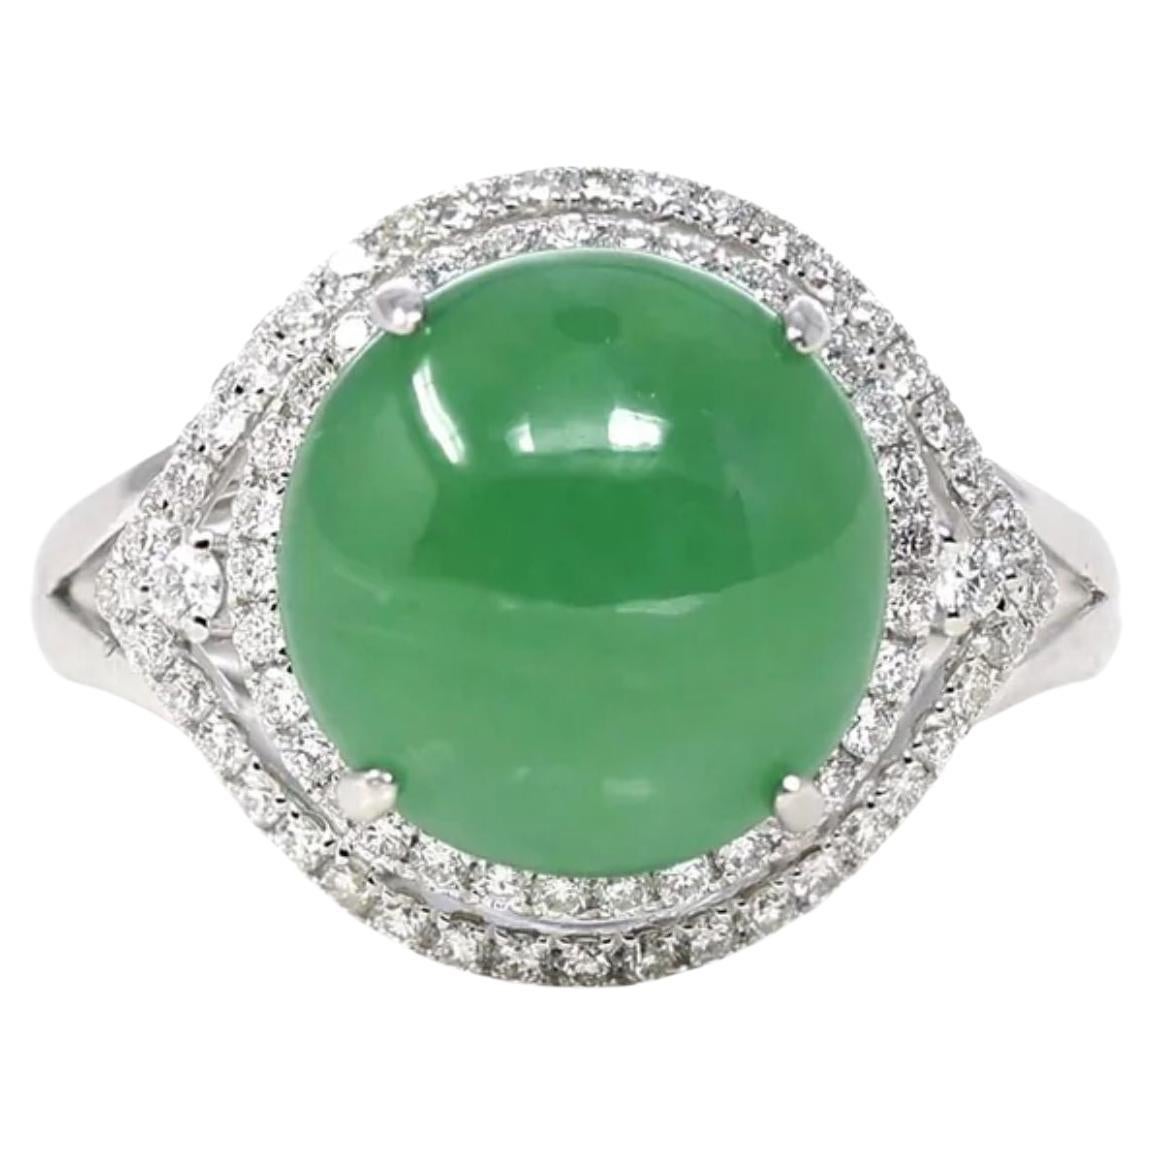 18k White Gold Natural Imperial Green Oval Jadeite Jade Engagement Ring Diamonds